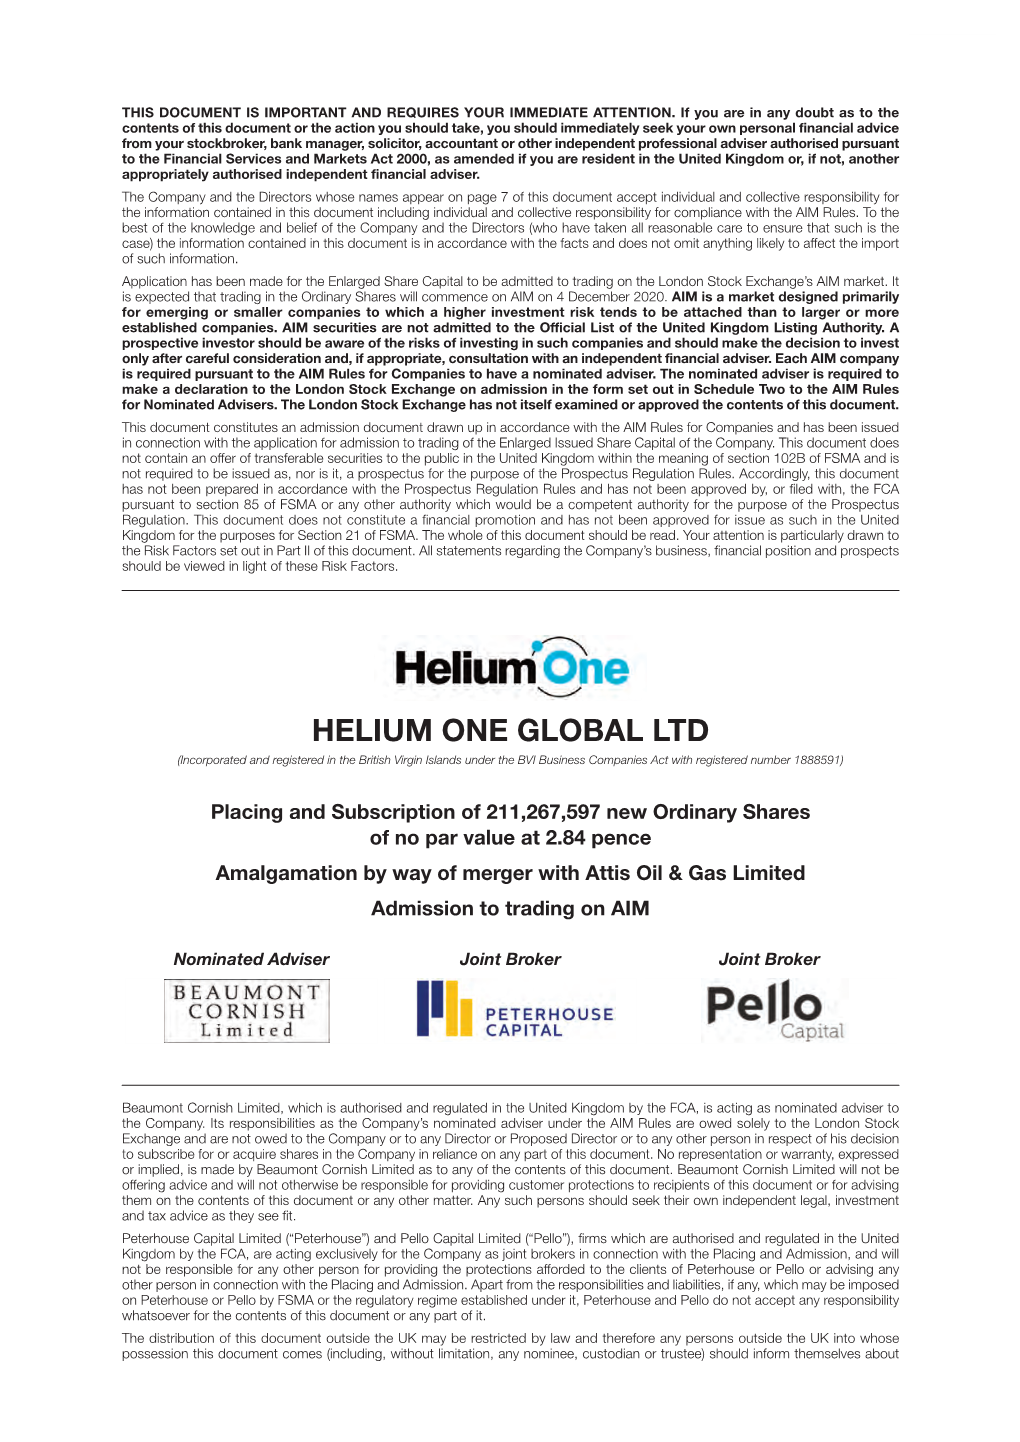 HELIUM ONE GLOBAL LTD (Incorporated and Registered in the British Virgin Islands Under the BVI Business Companies Act with Registered Number 1888591)